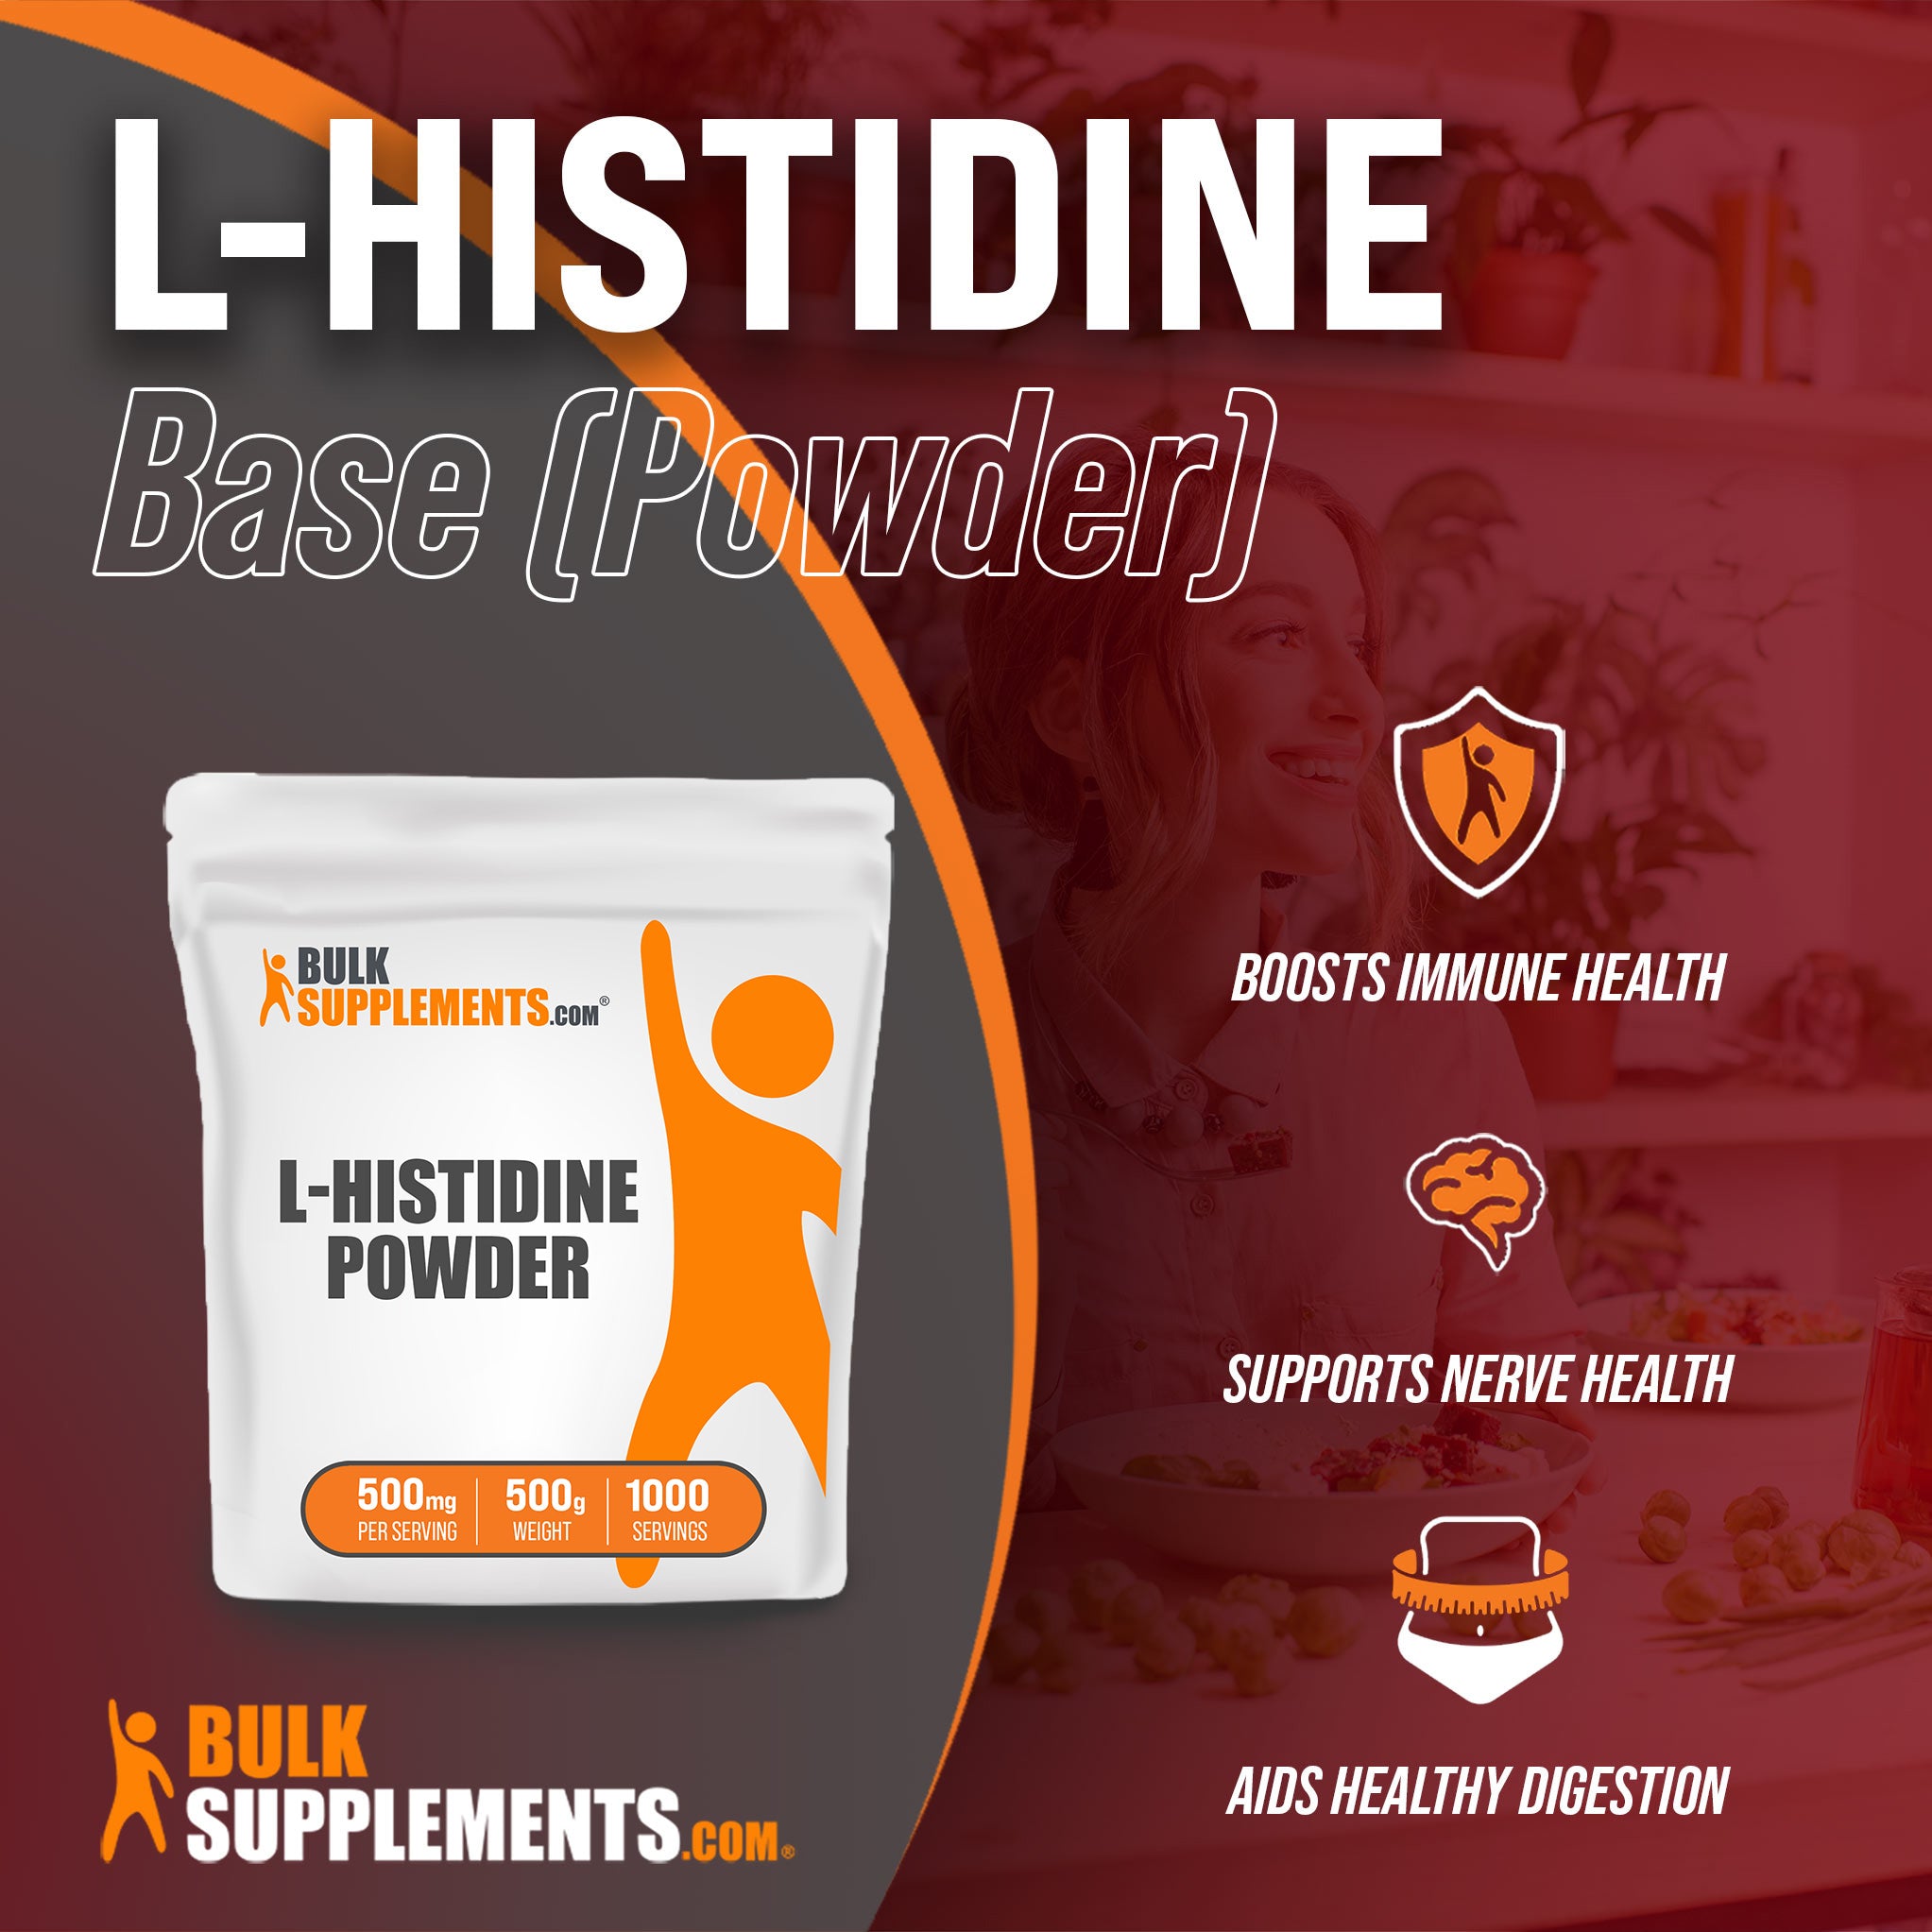 Benefits of L-Histidine Base: boosts immune health, supports nerve health, aids healthy digestion